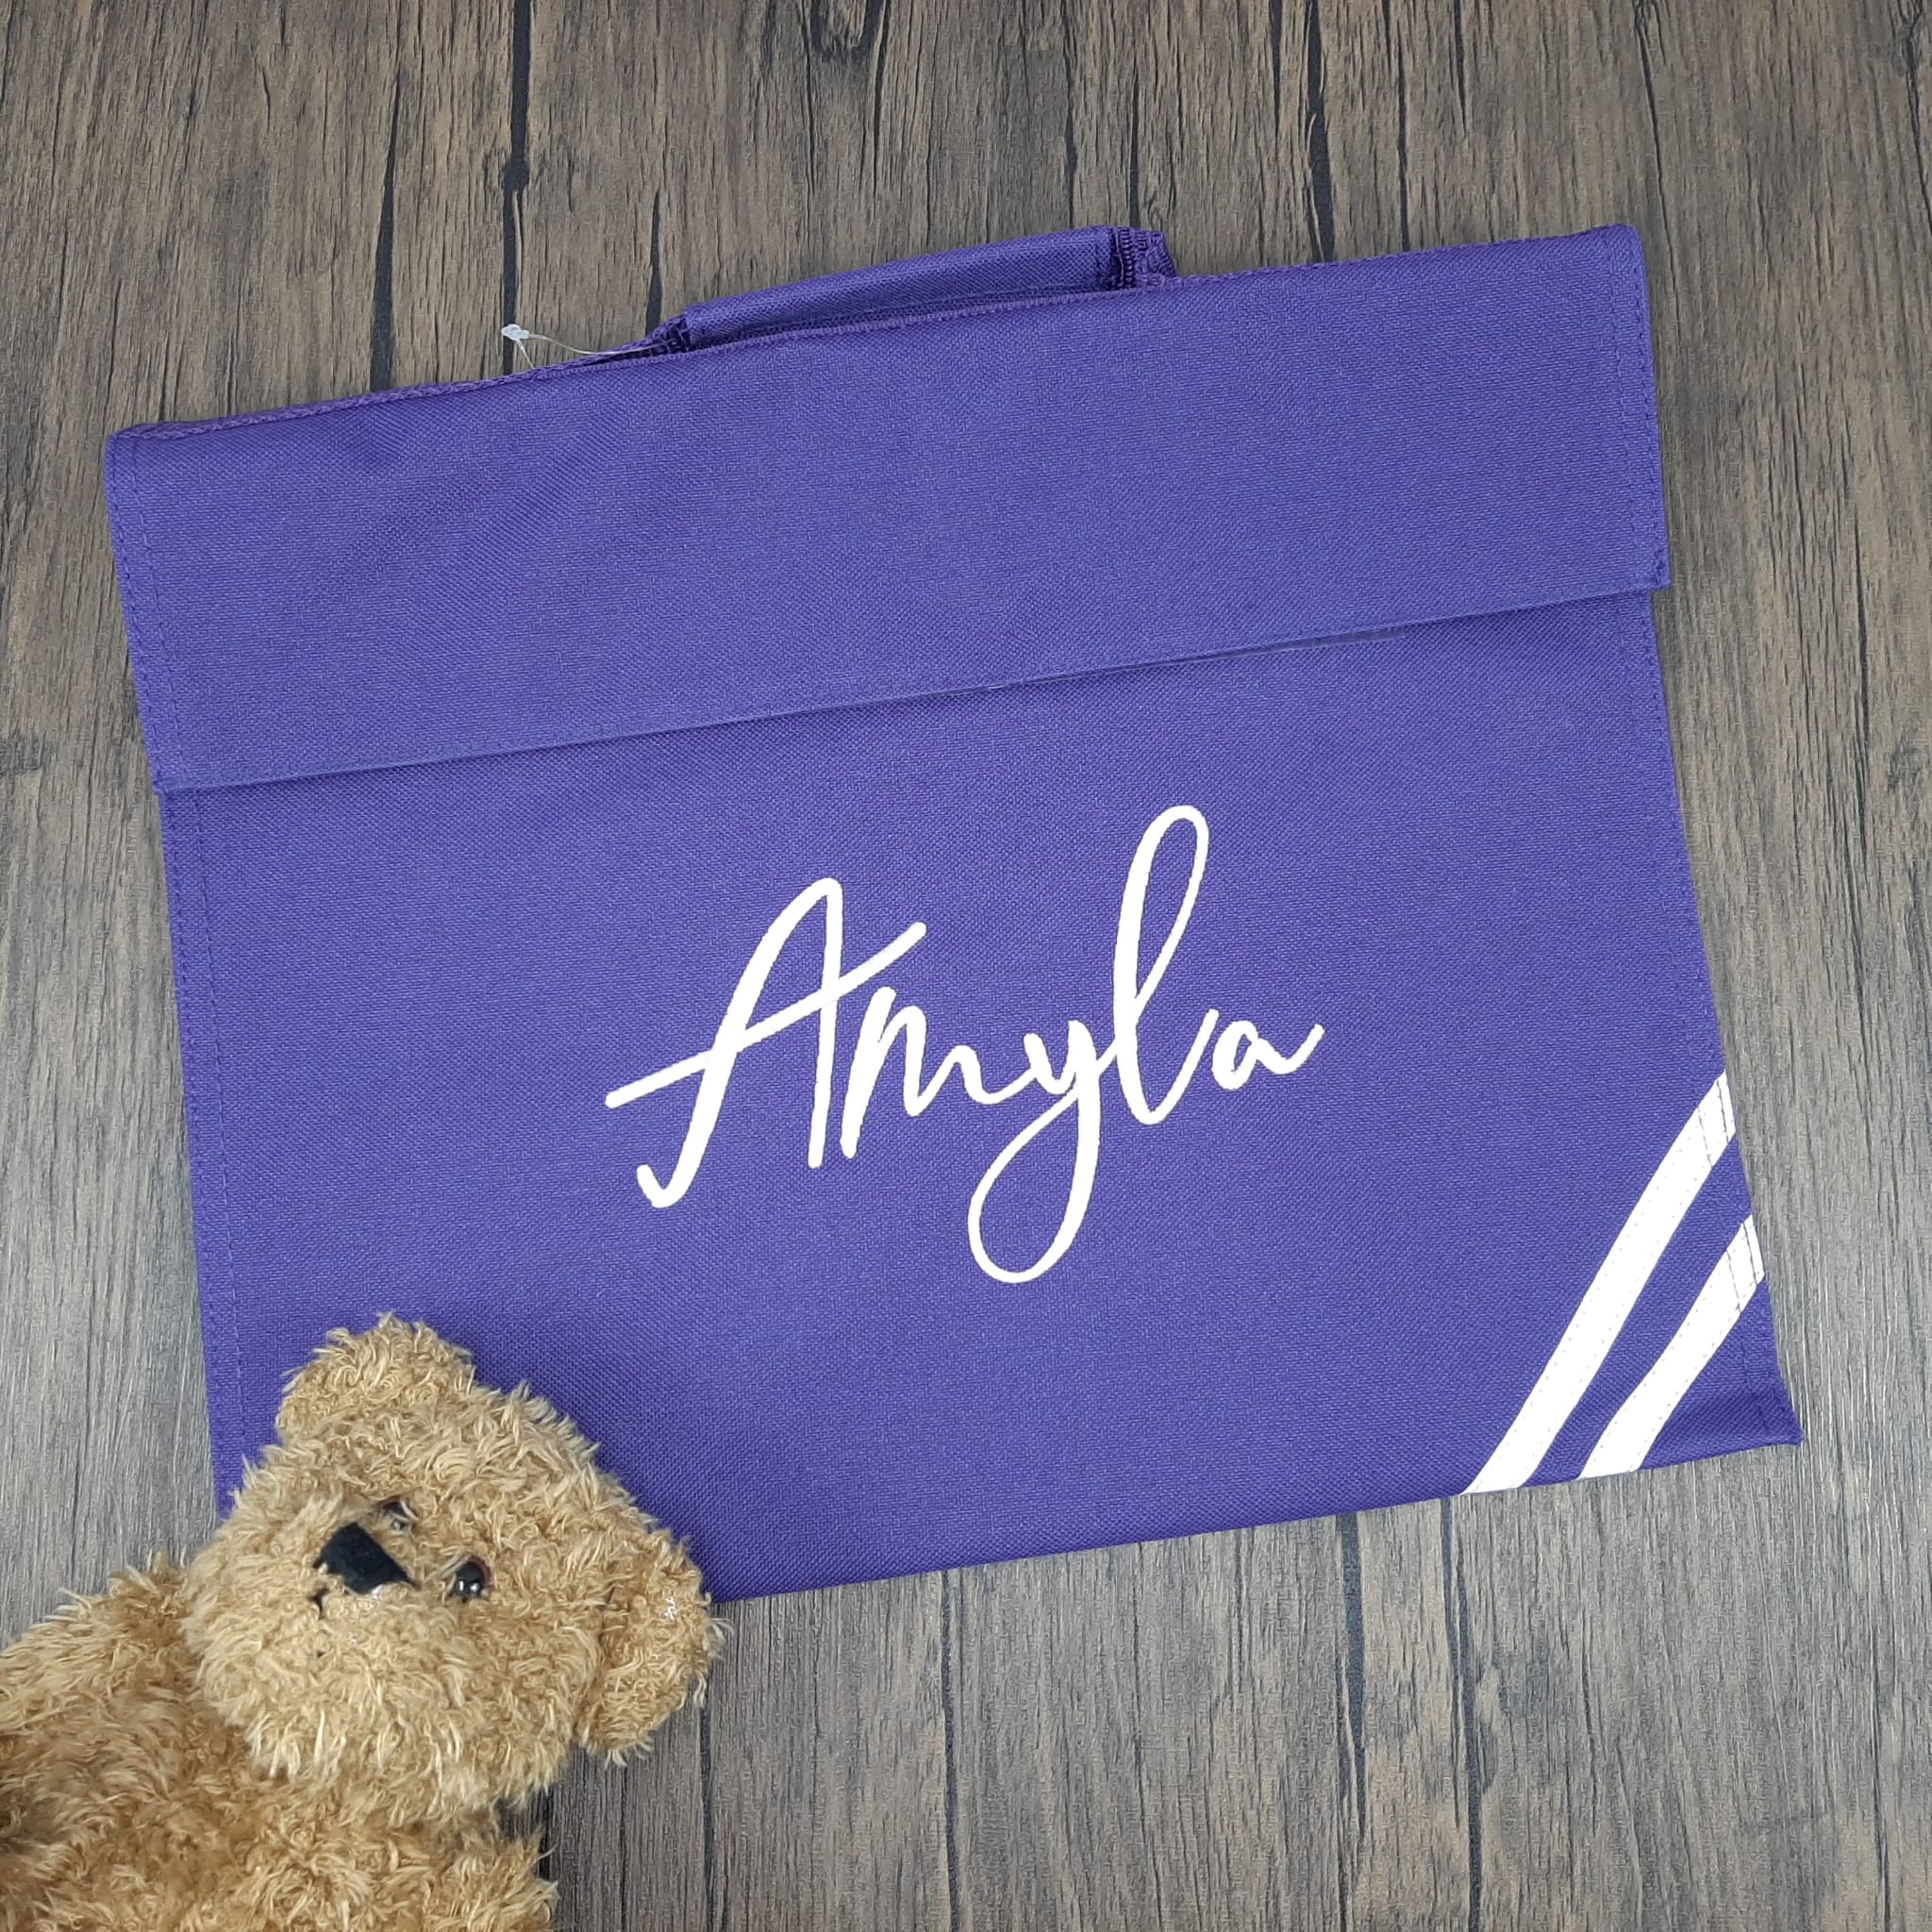 school book bag with personalised embroidered name